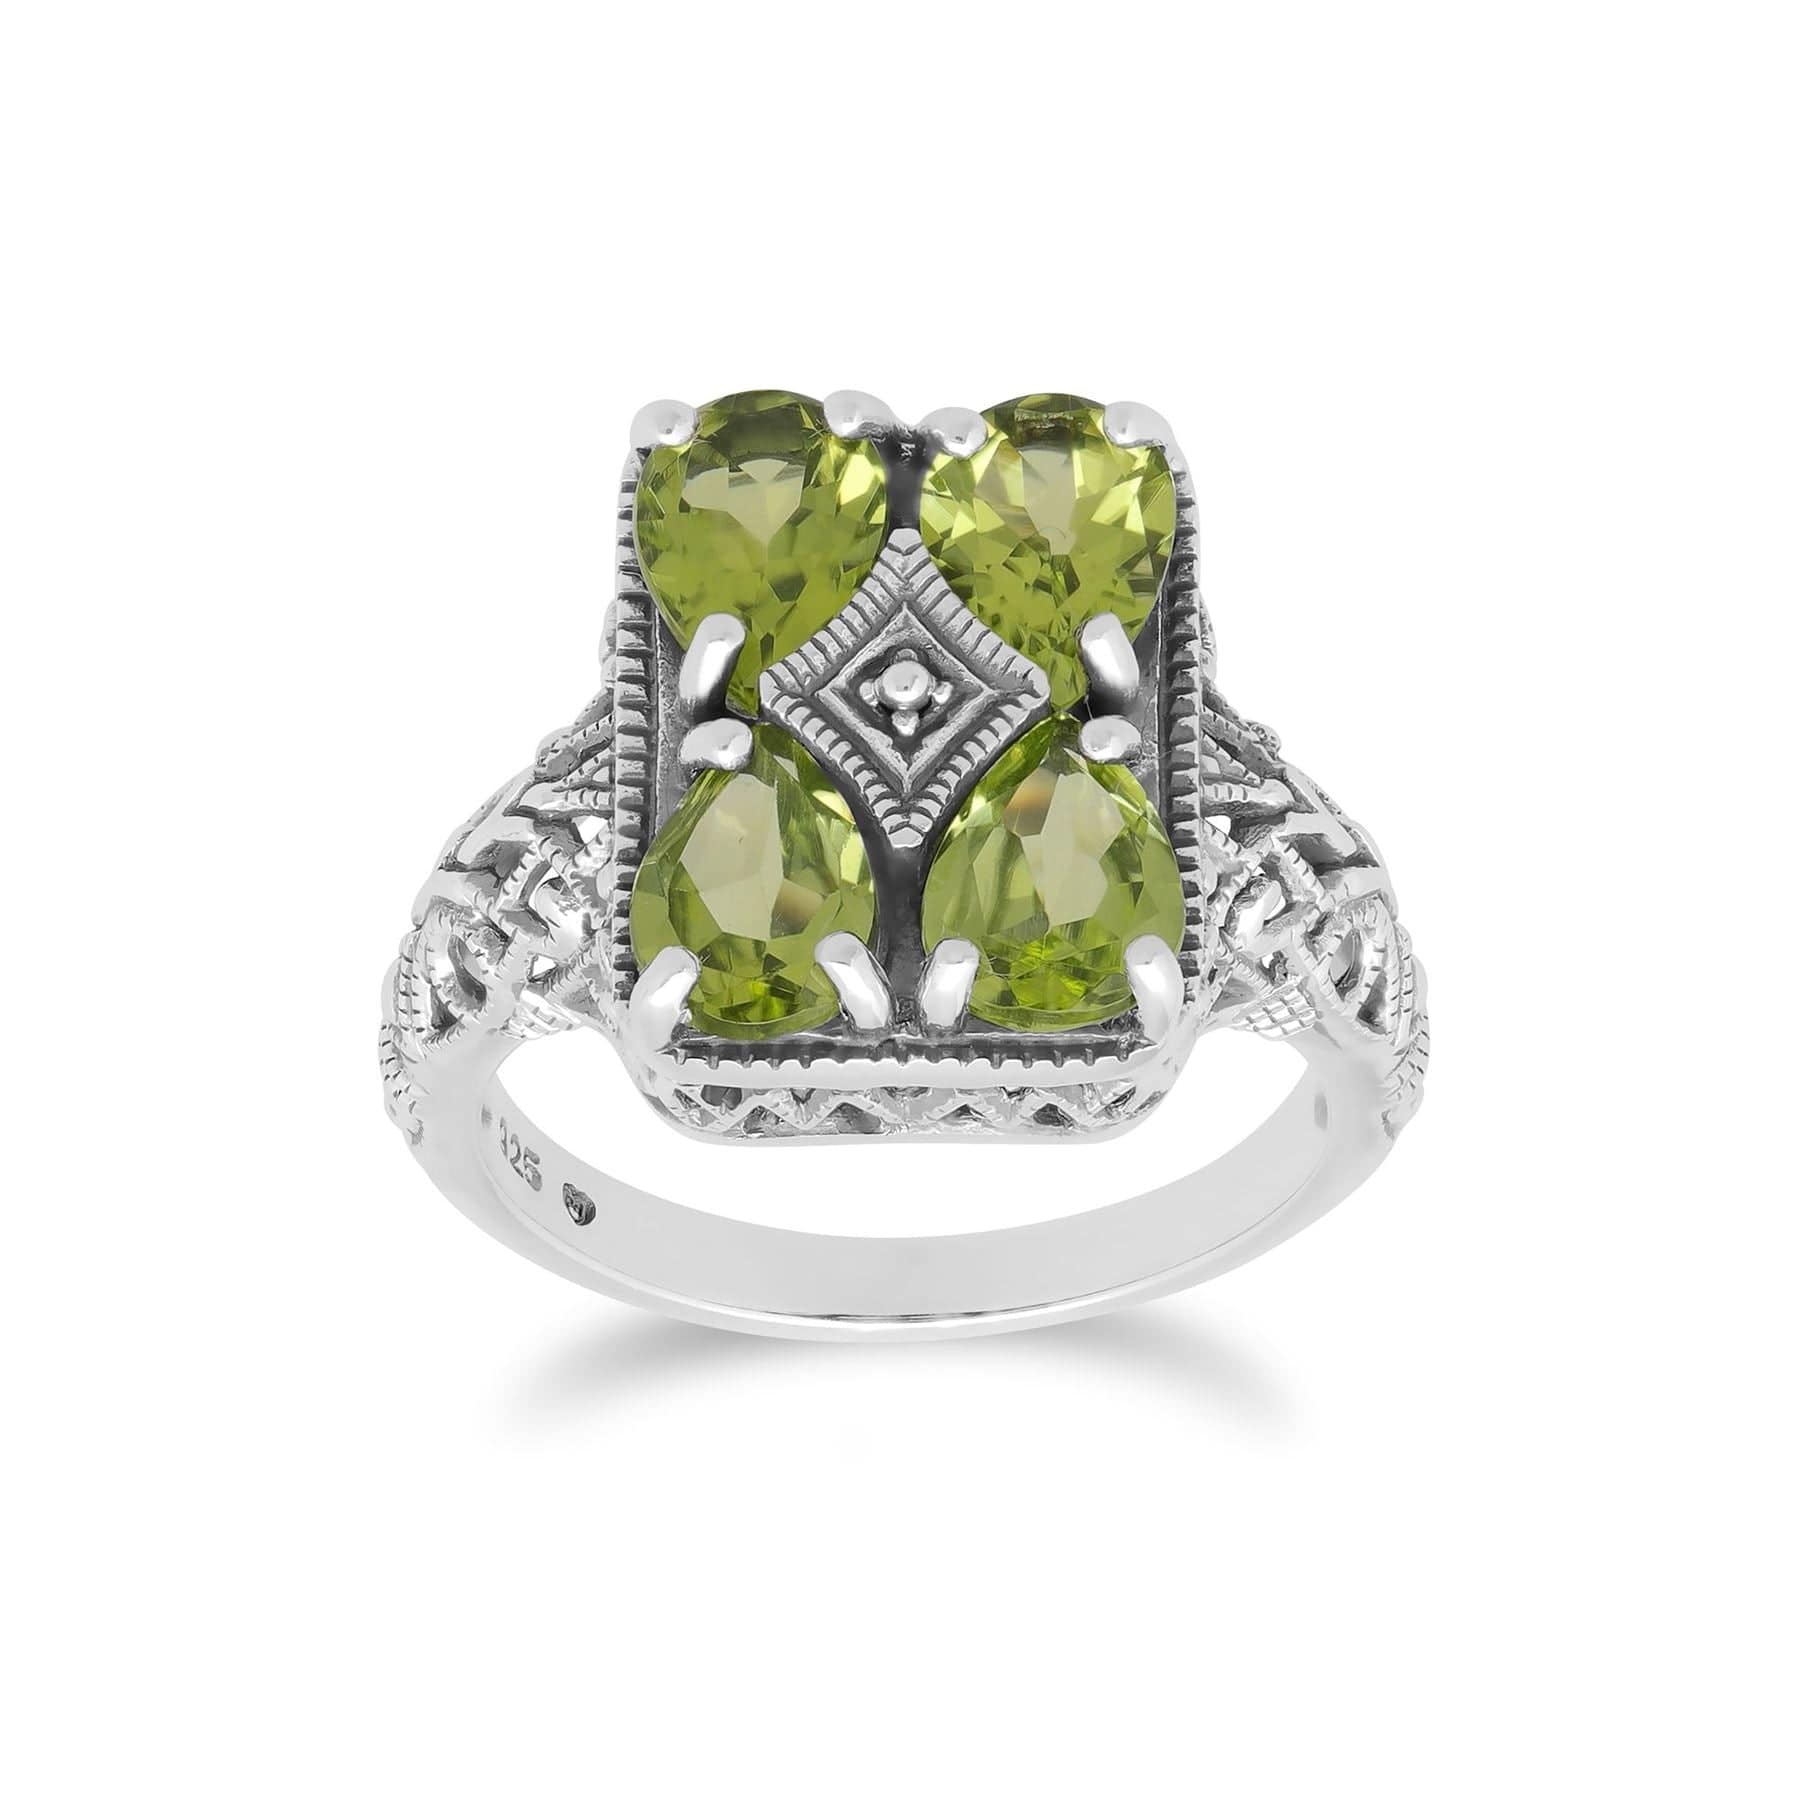 241R031008925 Art Nouveau Inspired Peridot Statement Ring in 925 Sterling Silver 2